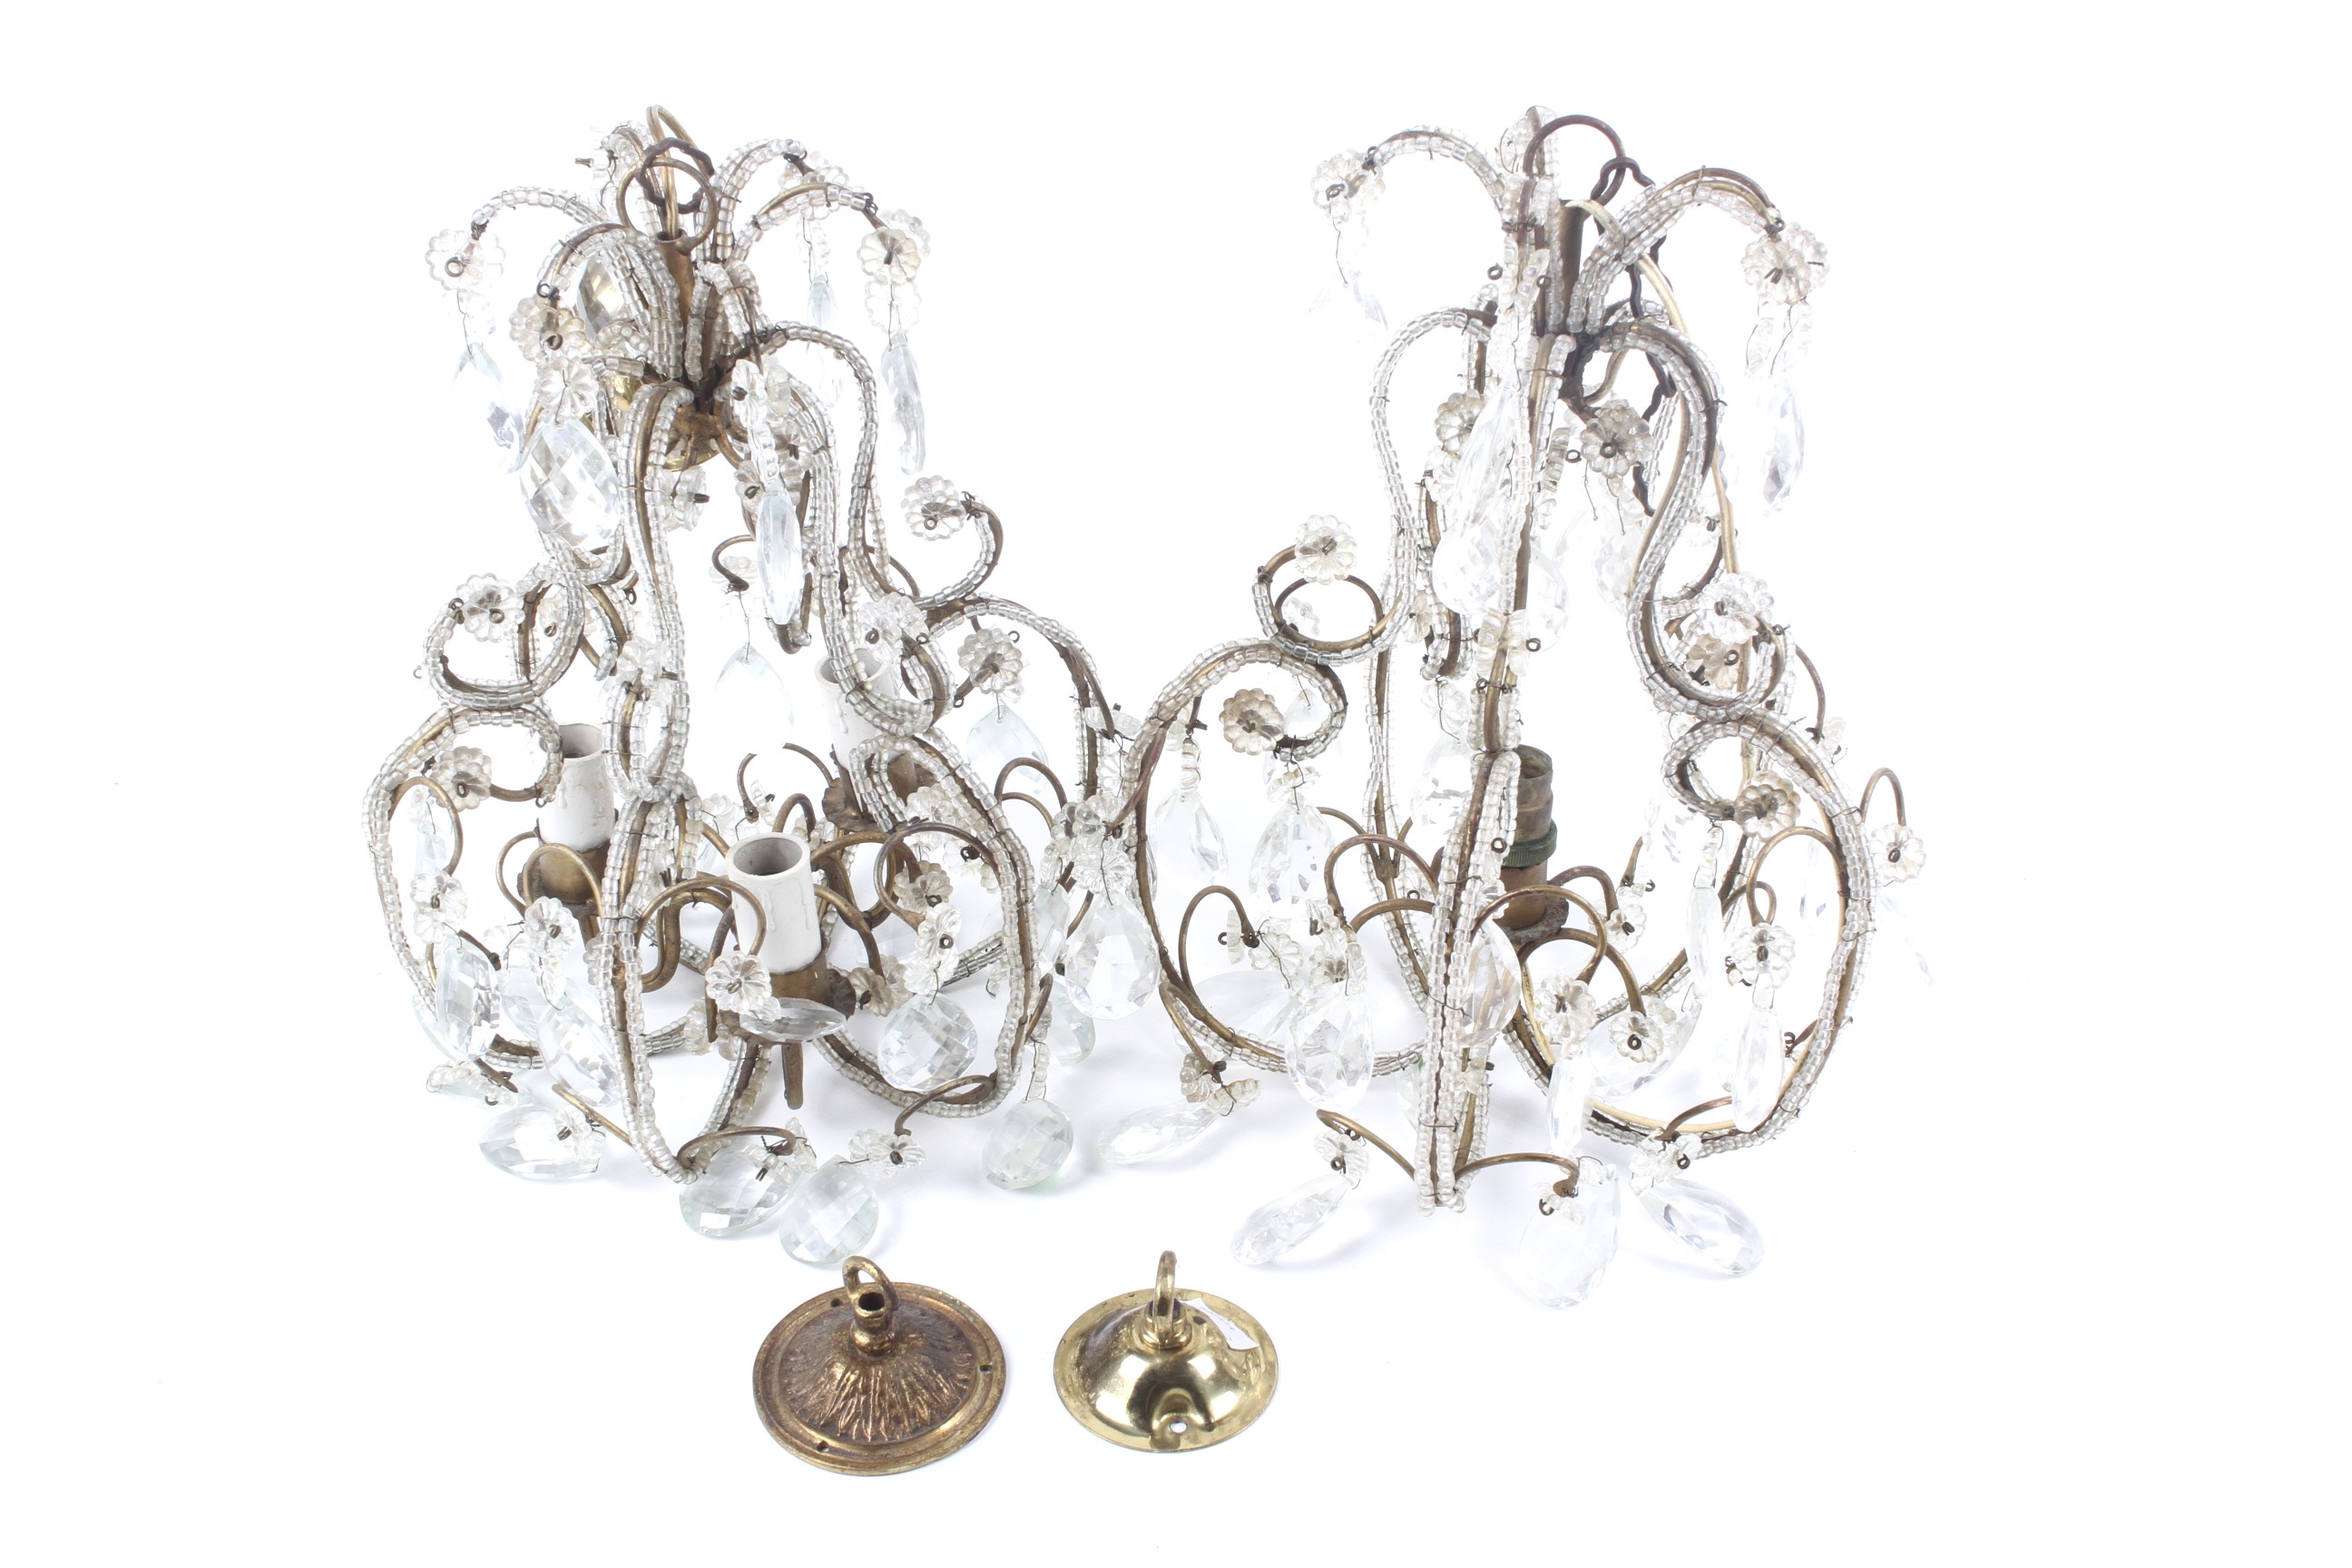 A pair of 20th century chandeliers.